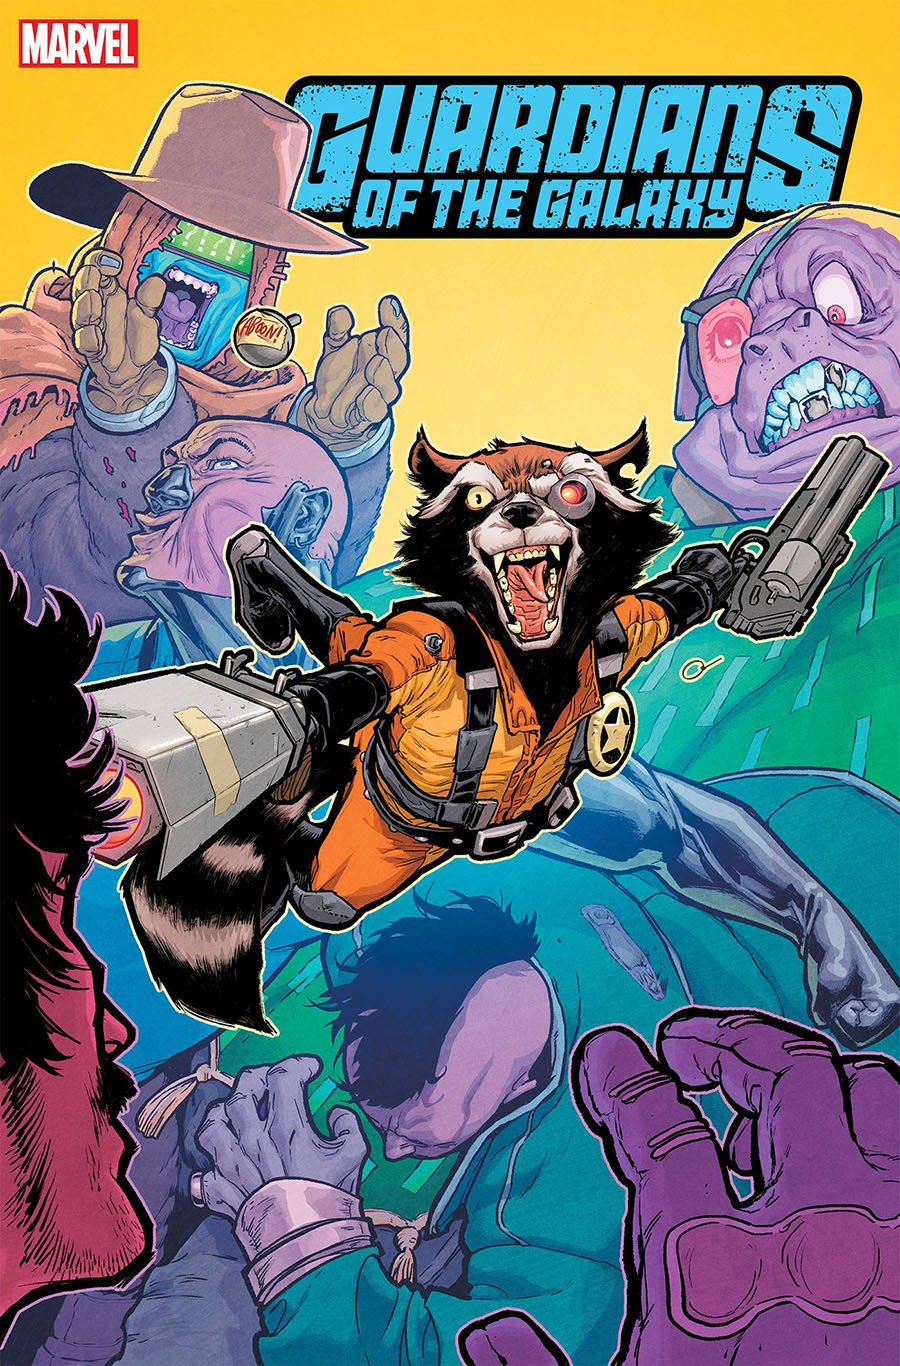 Marvel Sending Guardians of the Galaxy Comic Books to Children's